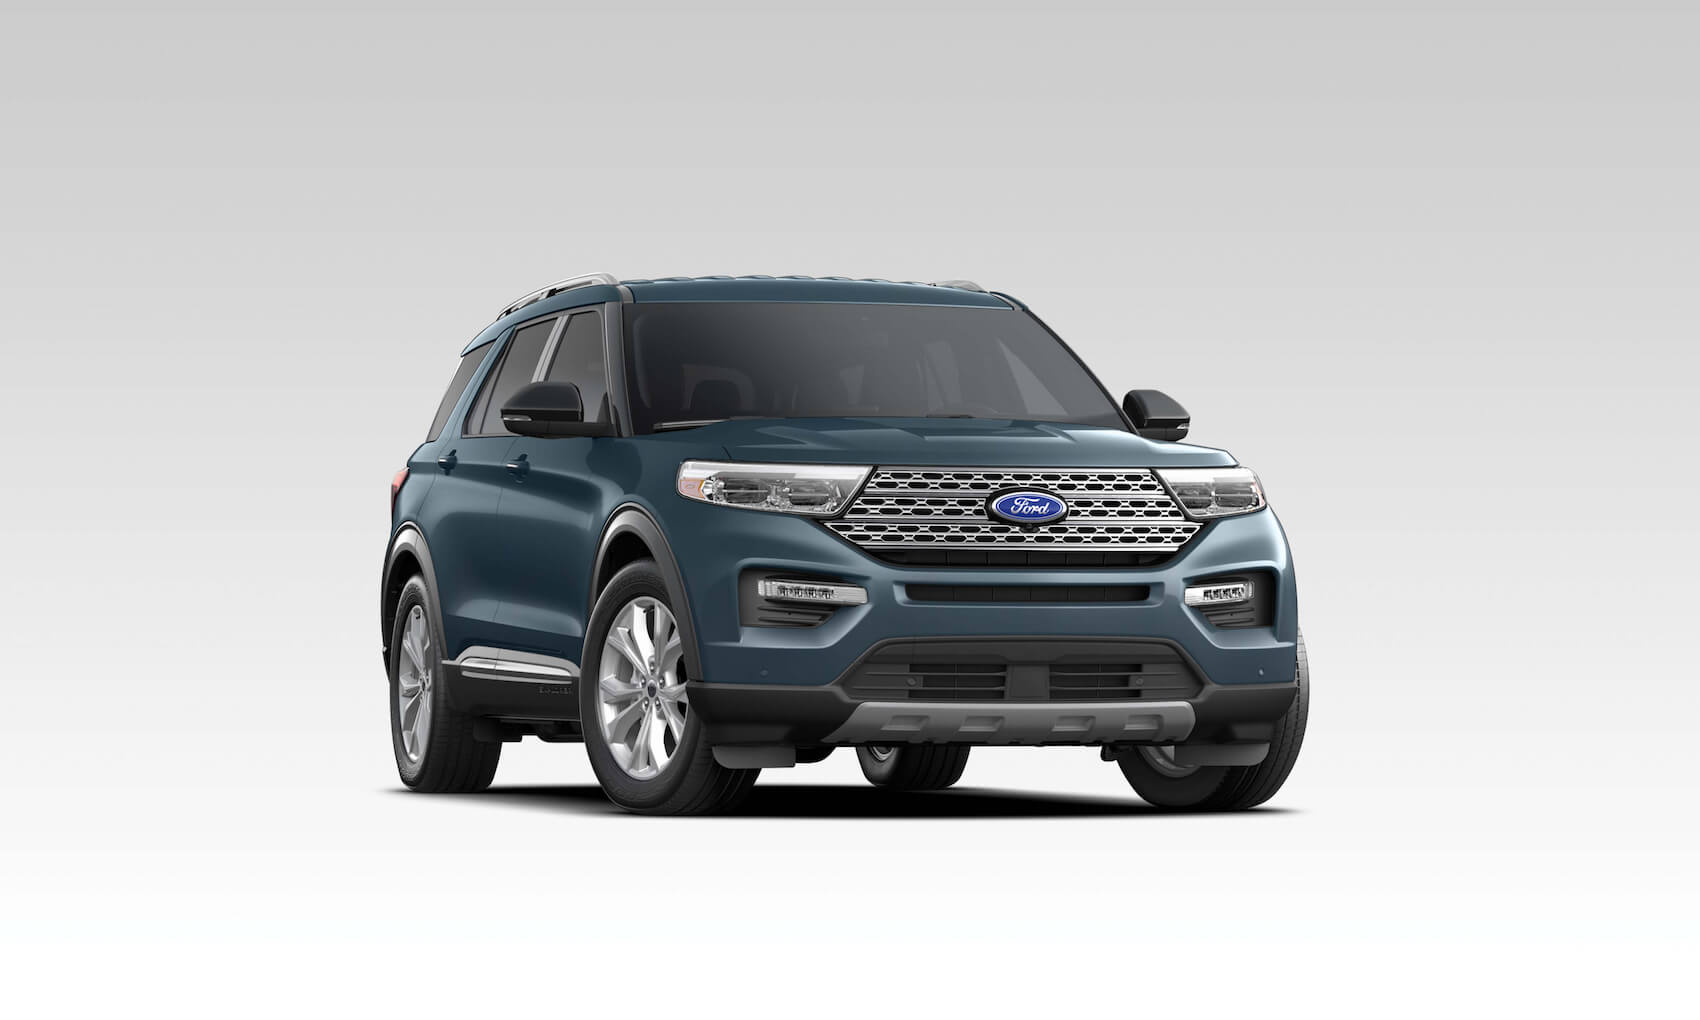 2021 Ford Explorer power and fuel efficiency